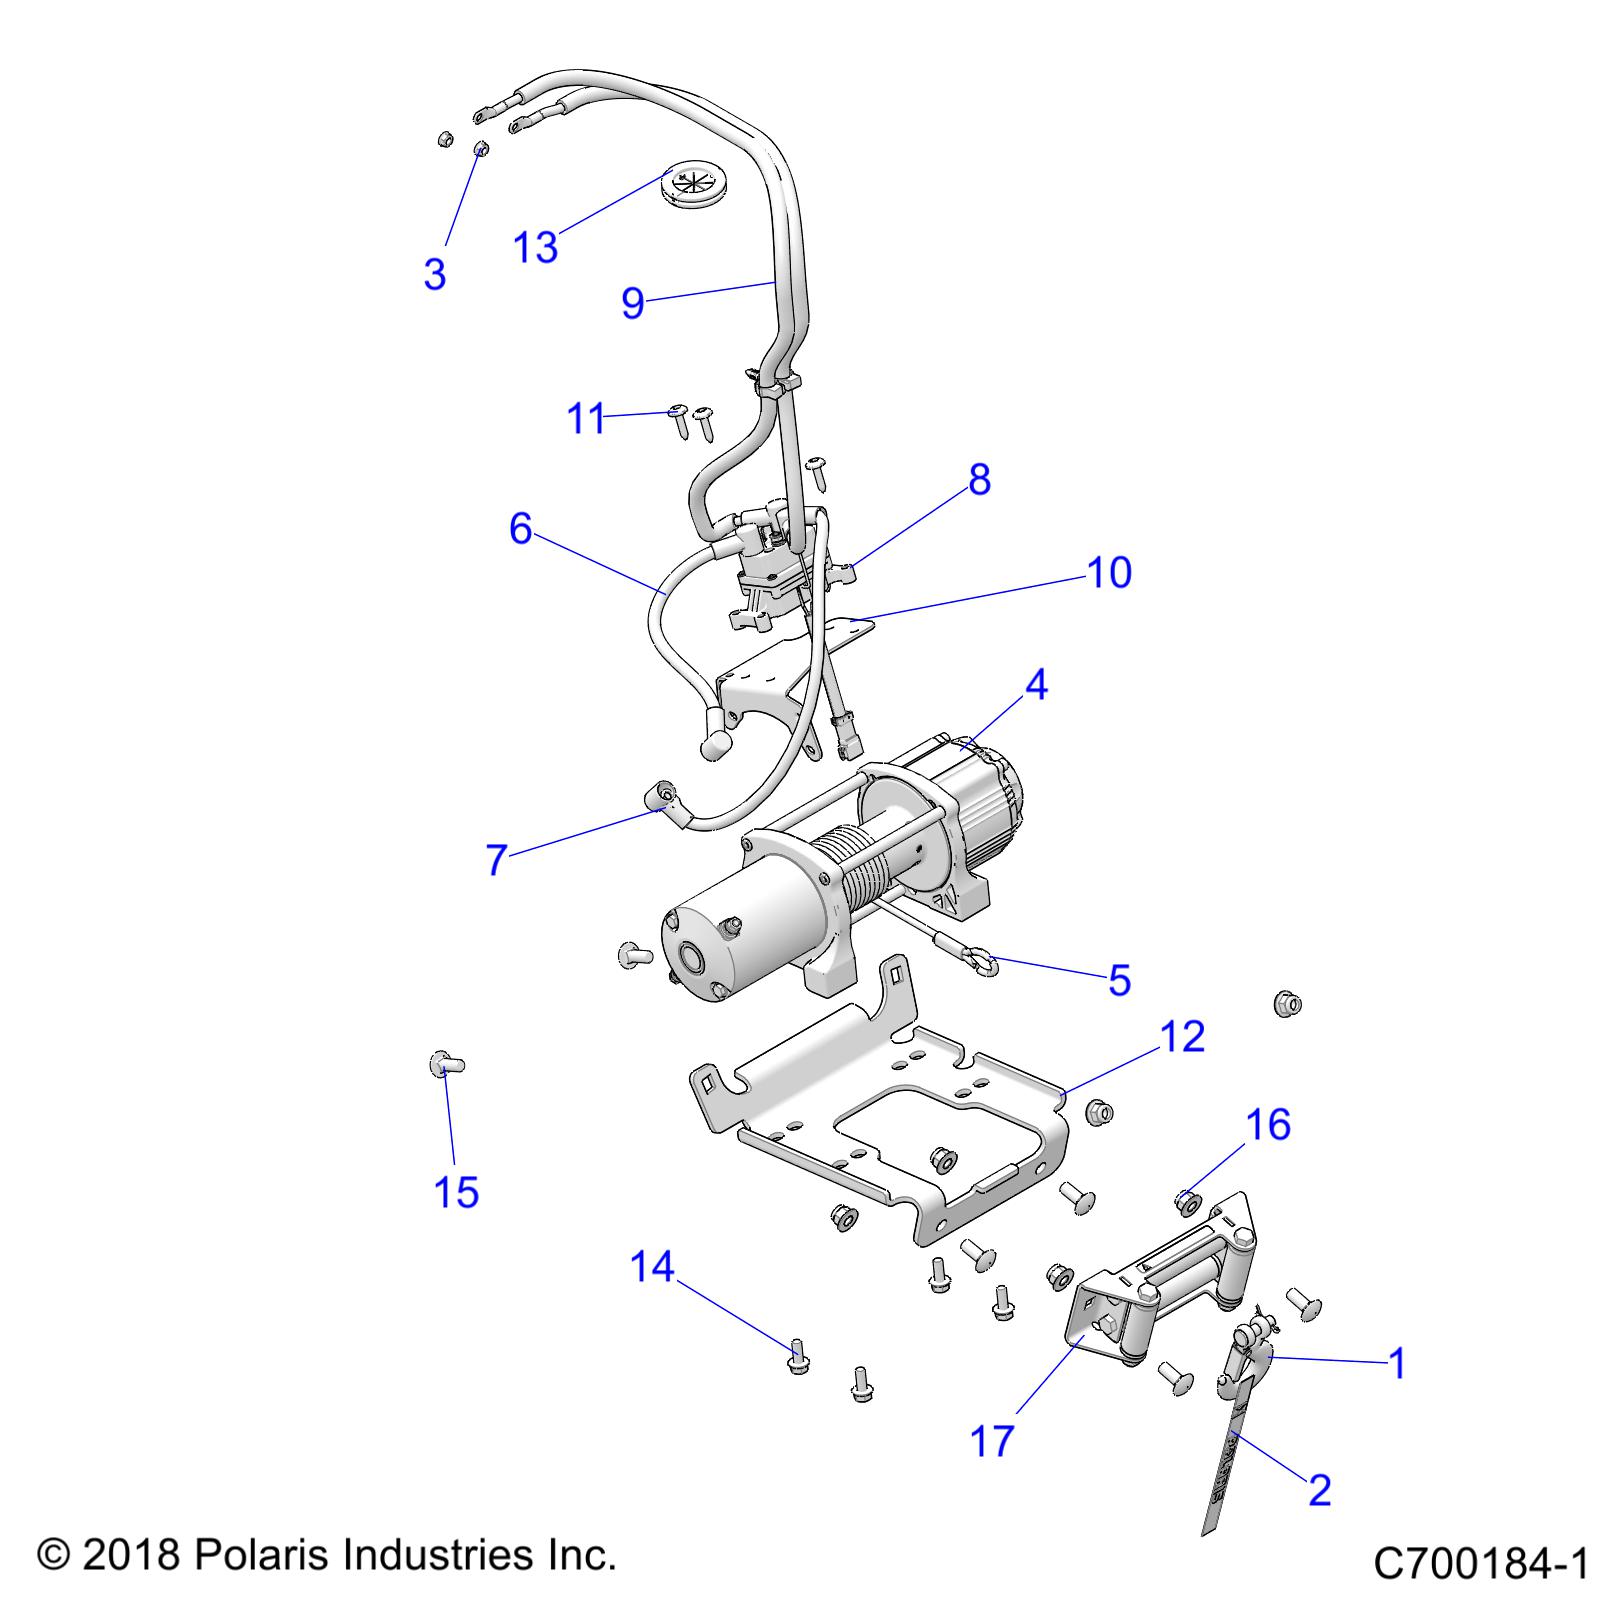 Part Number : 2637313 WINCH ASSEMBLY  4.5